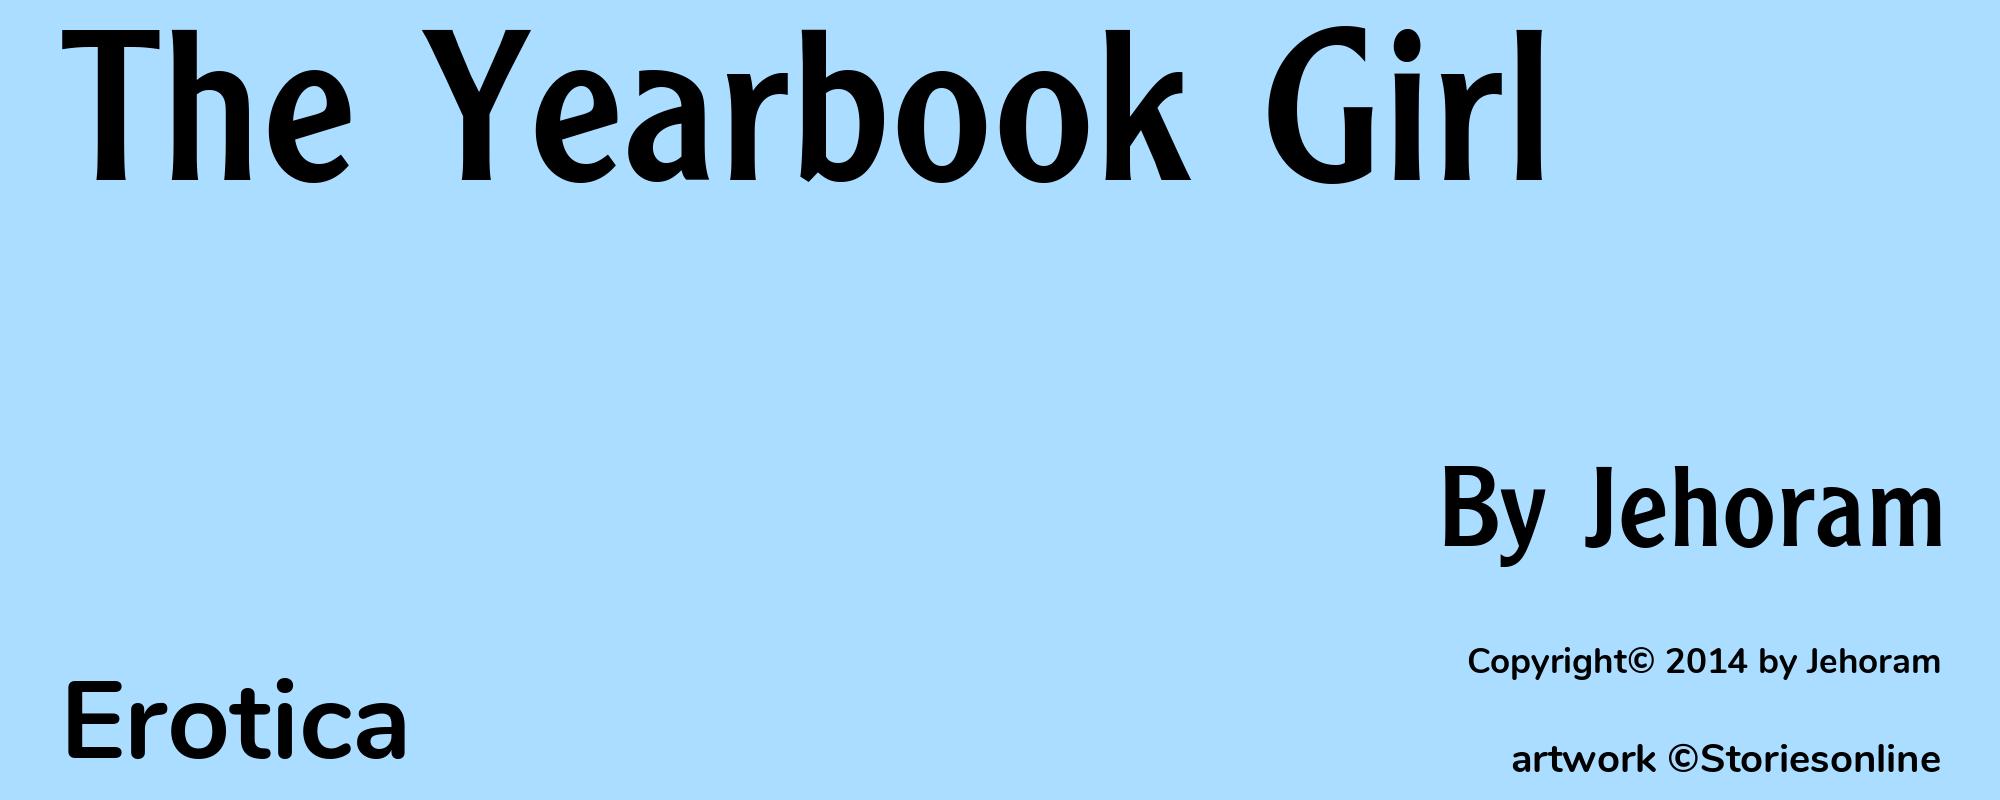 The Yearbook Girl - Cover